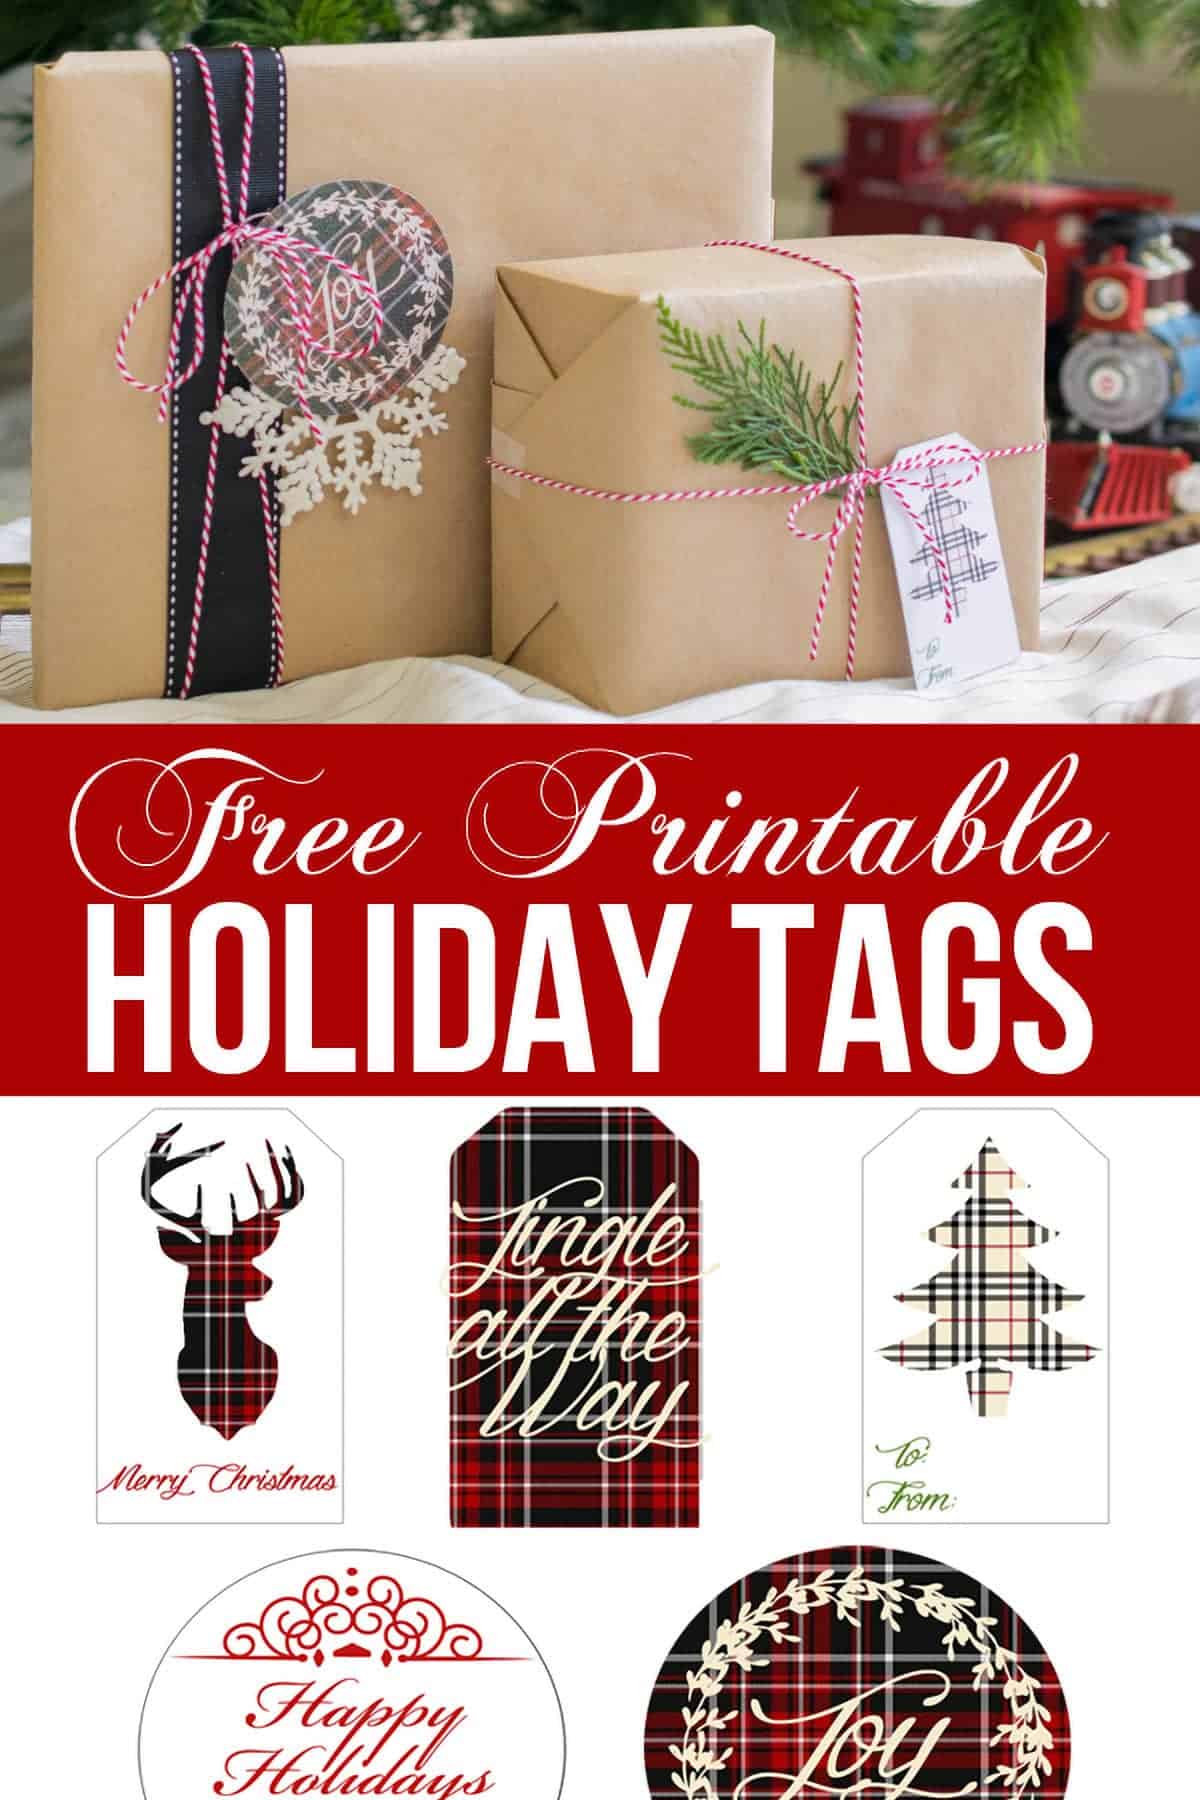 Packages covered with free printable gift tags and example tags